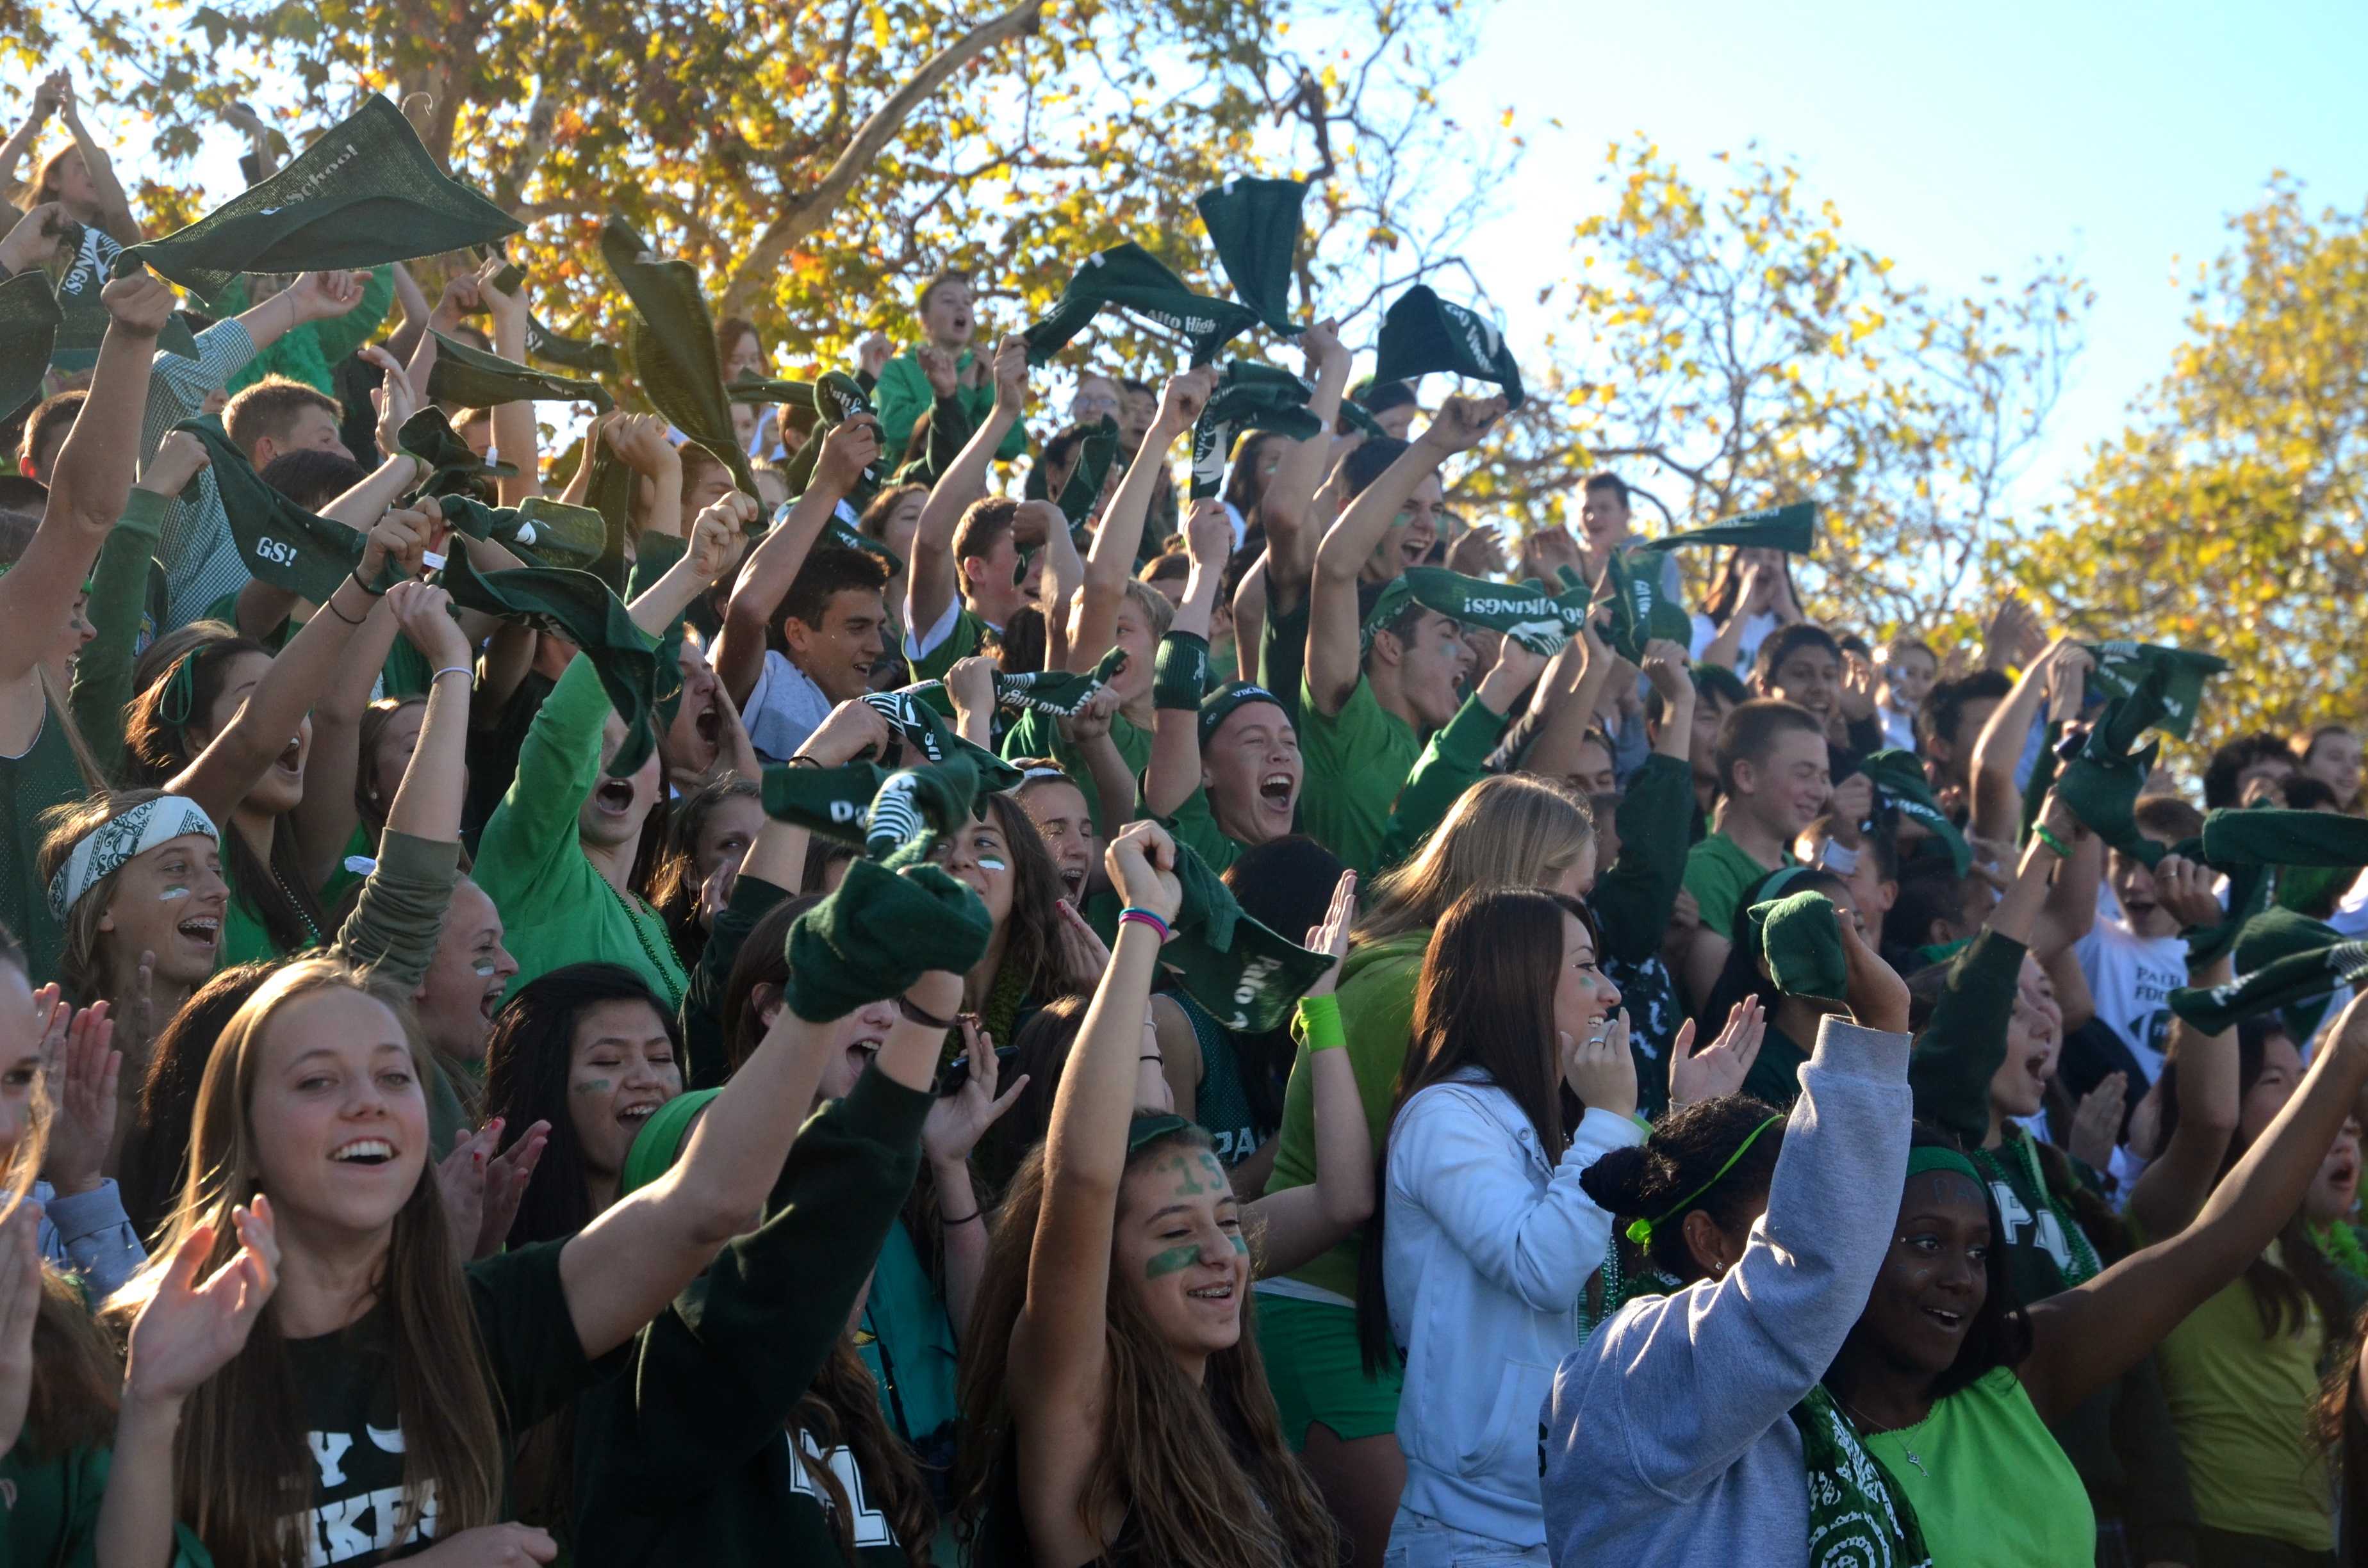 The Class of 2015 cheers on their peers during the sophomore spirit dance. [Photo: Cathy Rong]